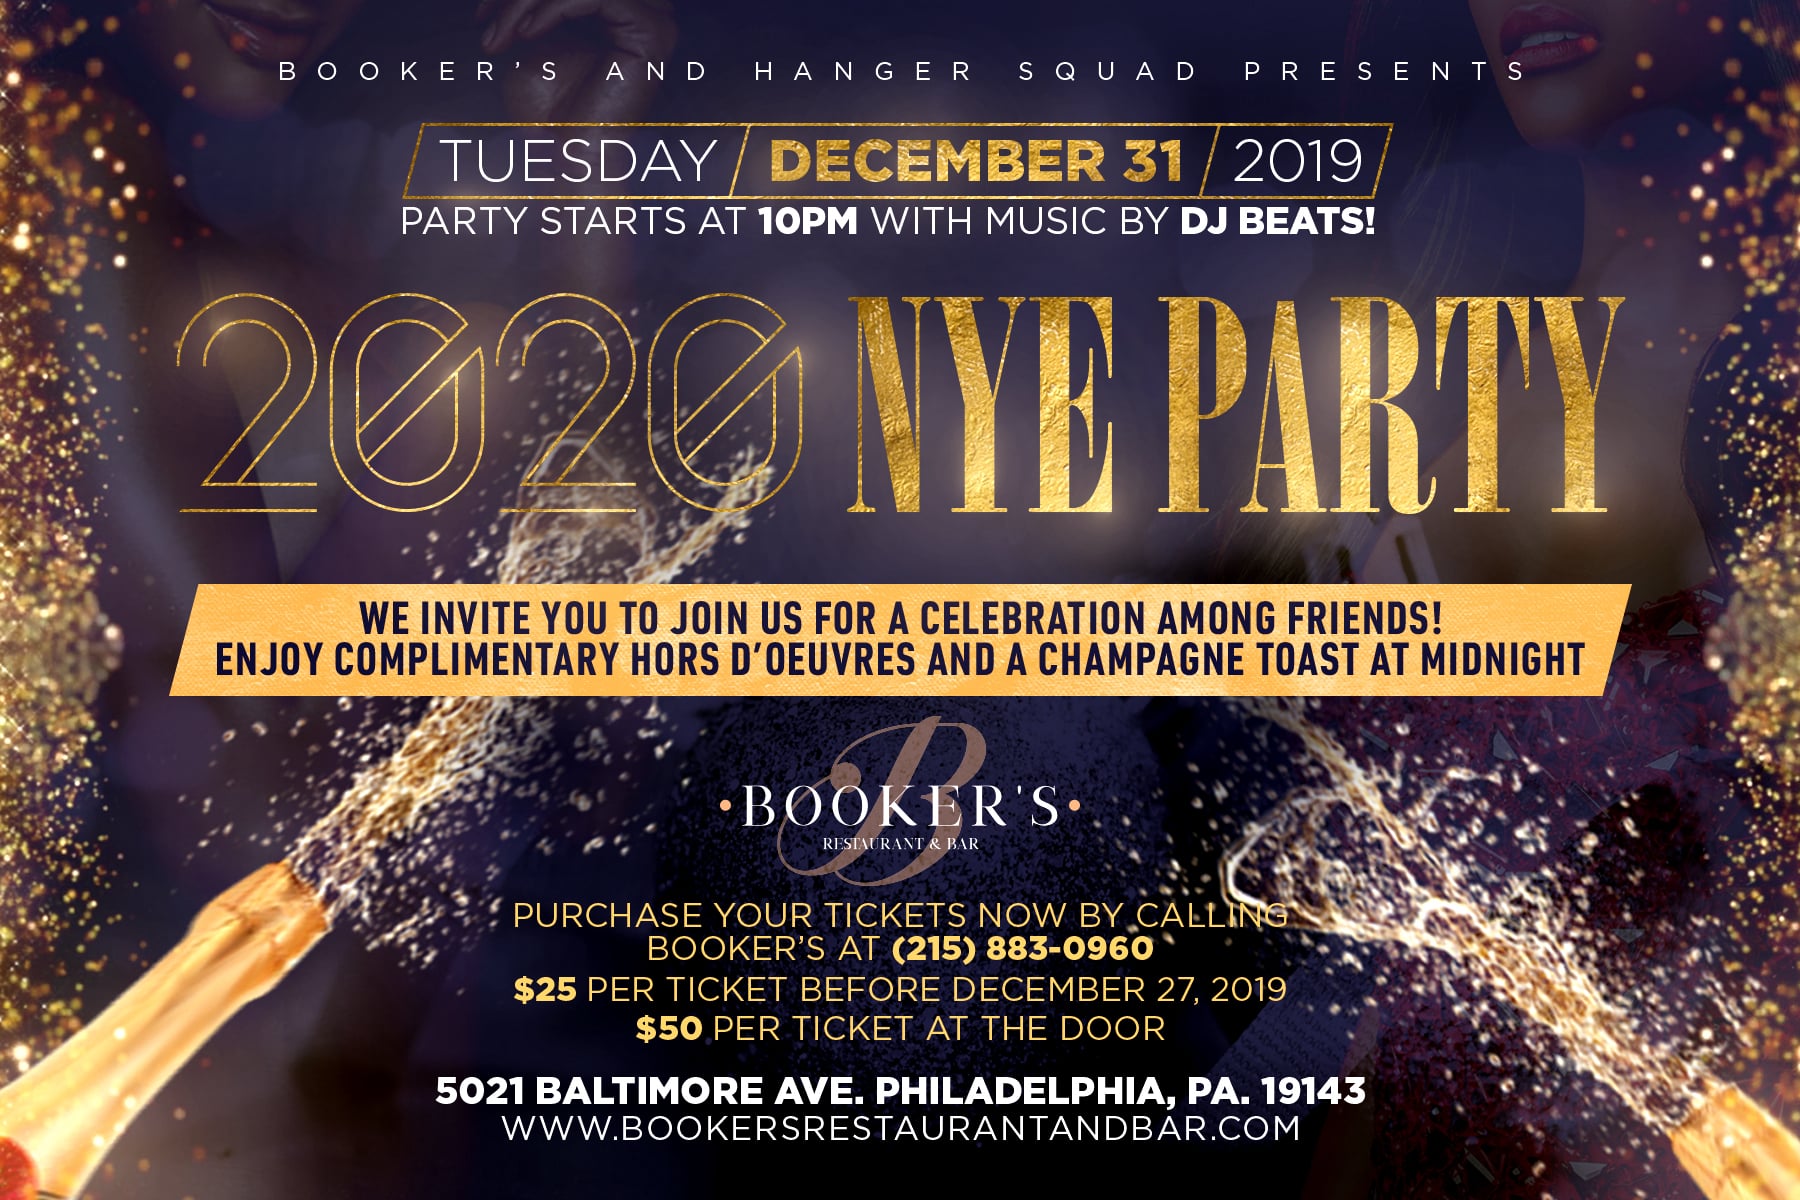 New Year party flyer